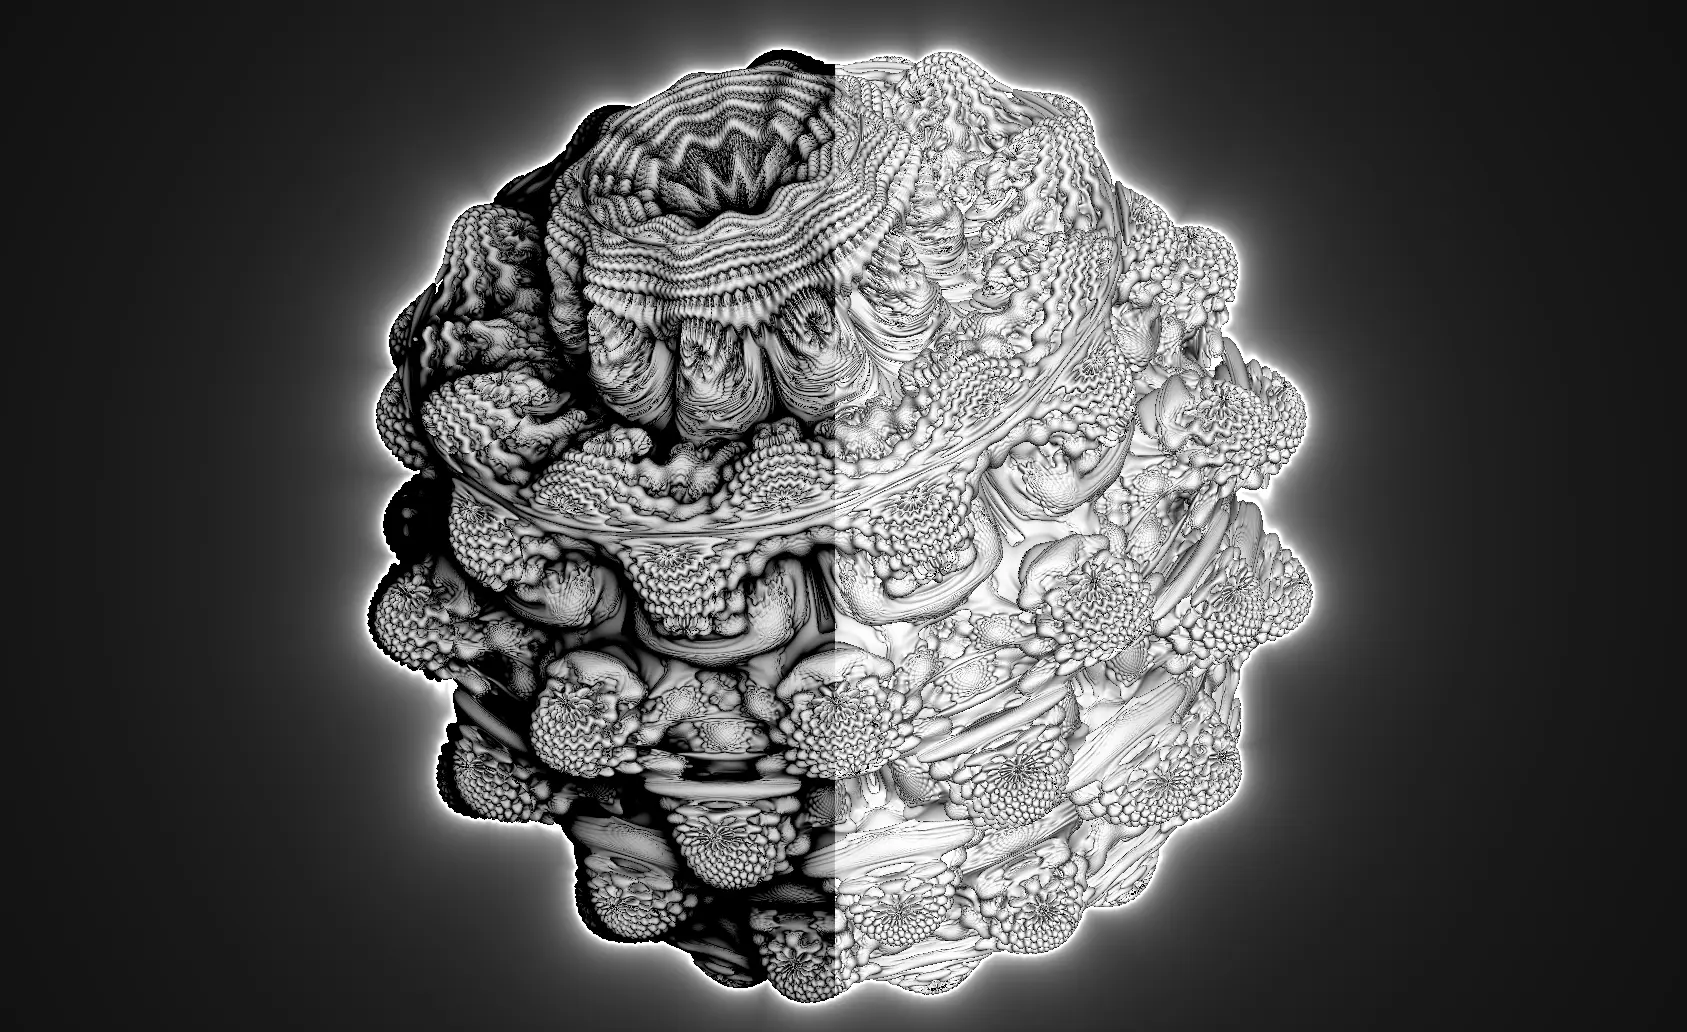 An example of ambient occlusion